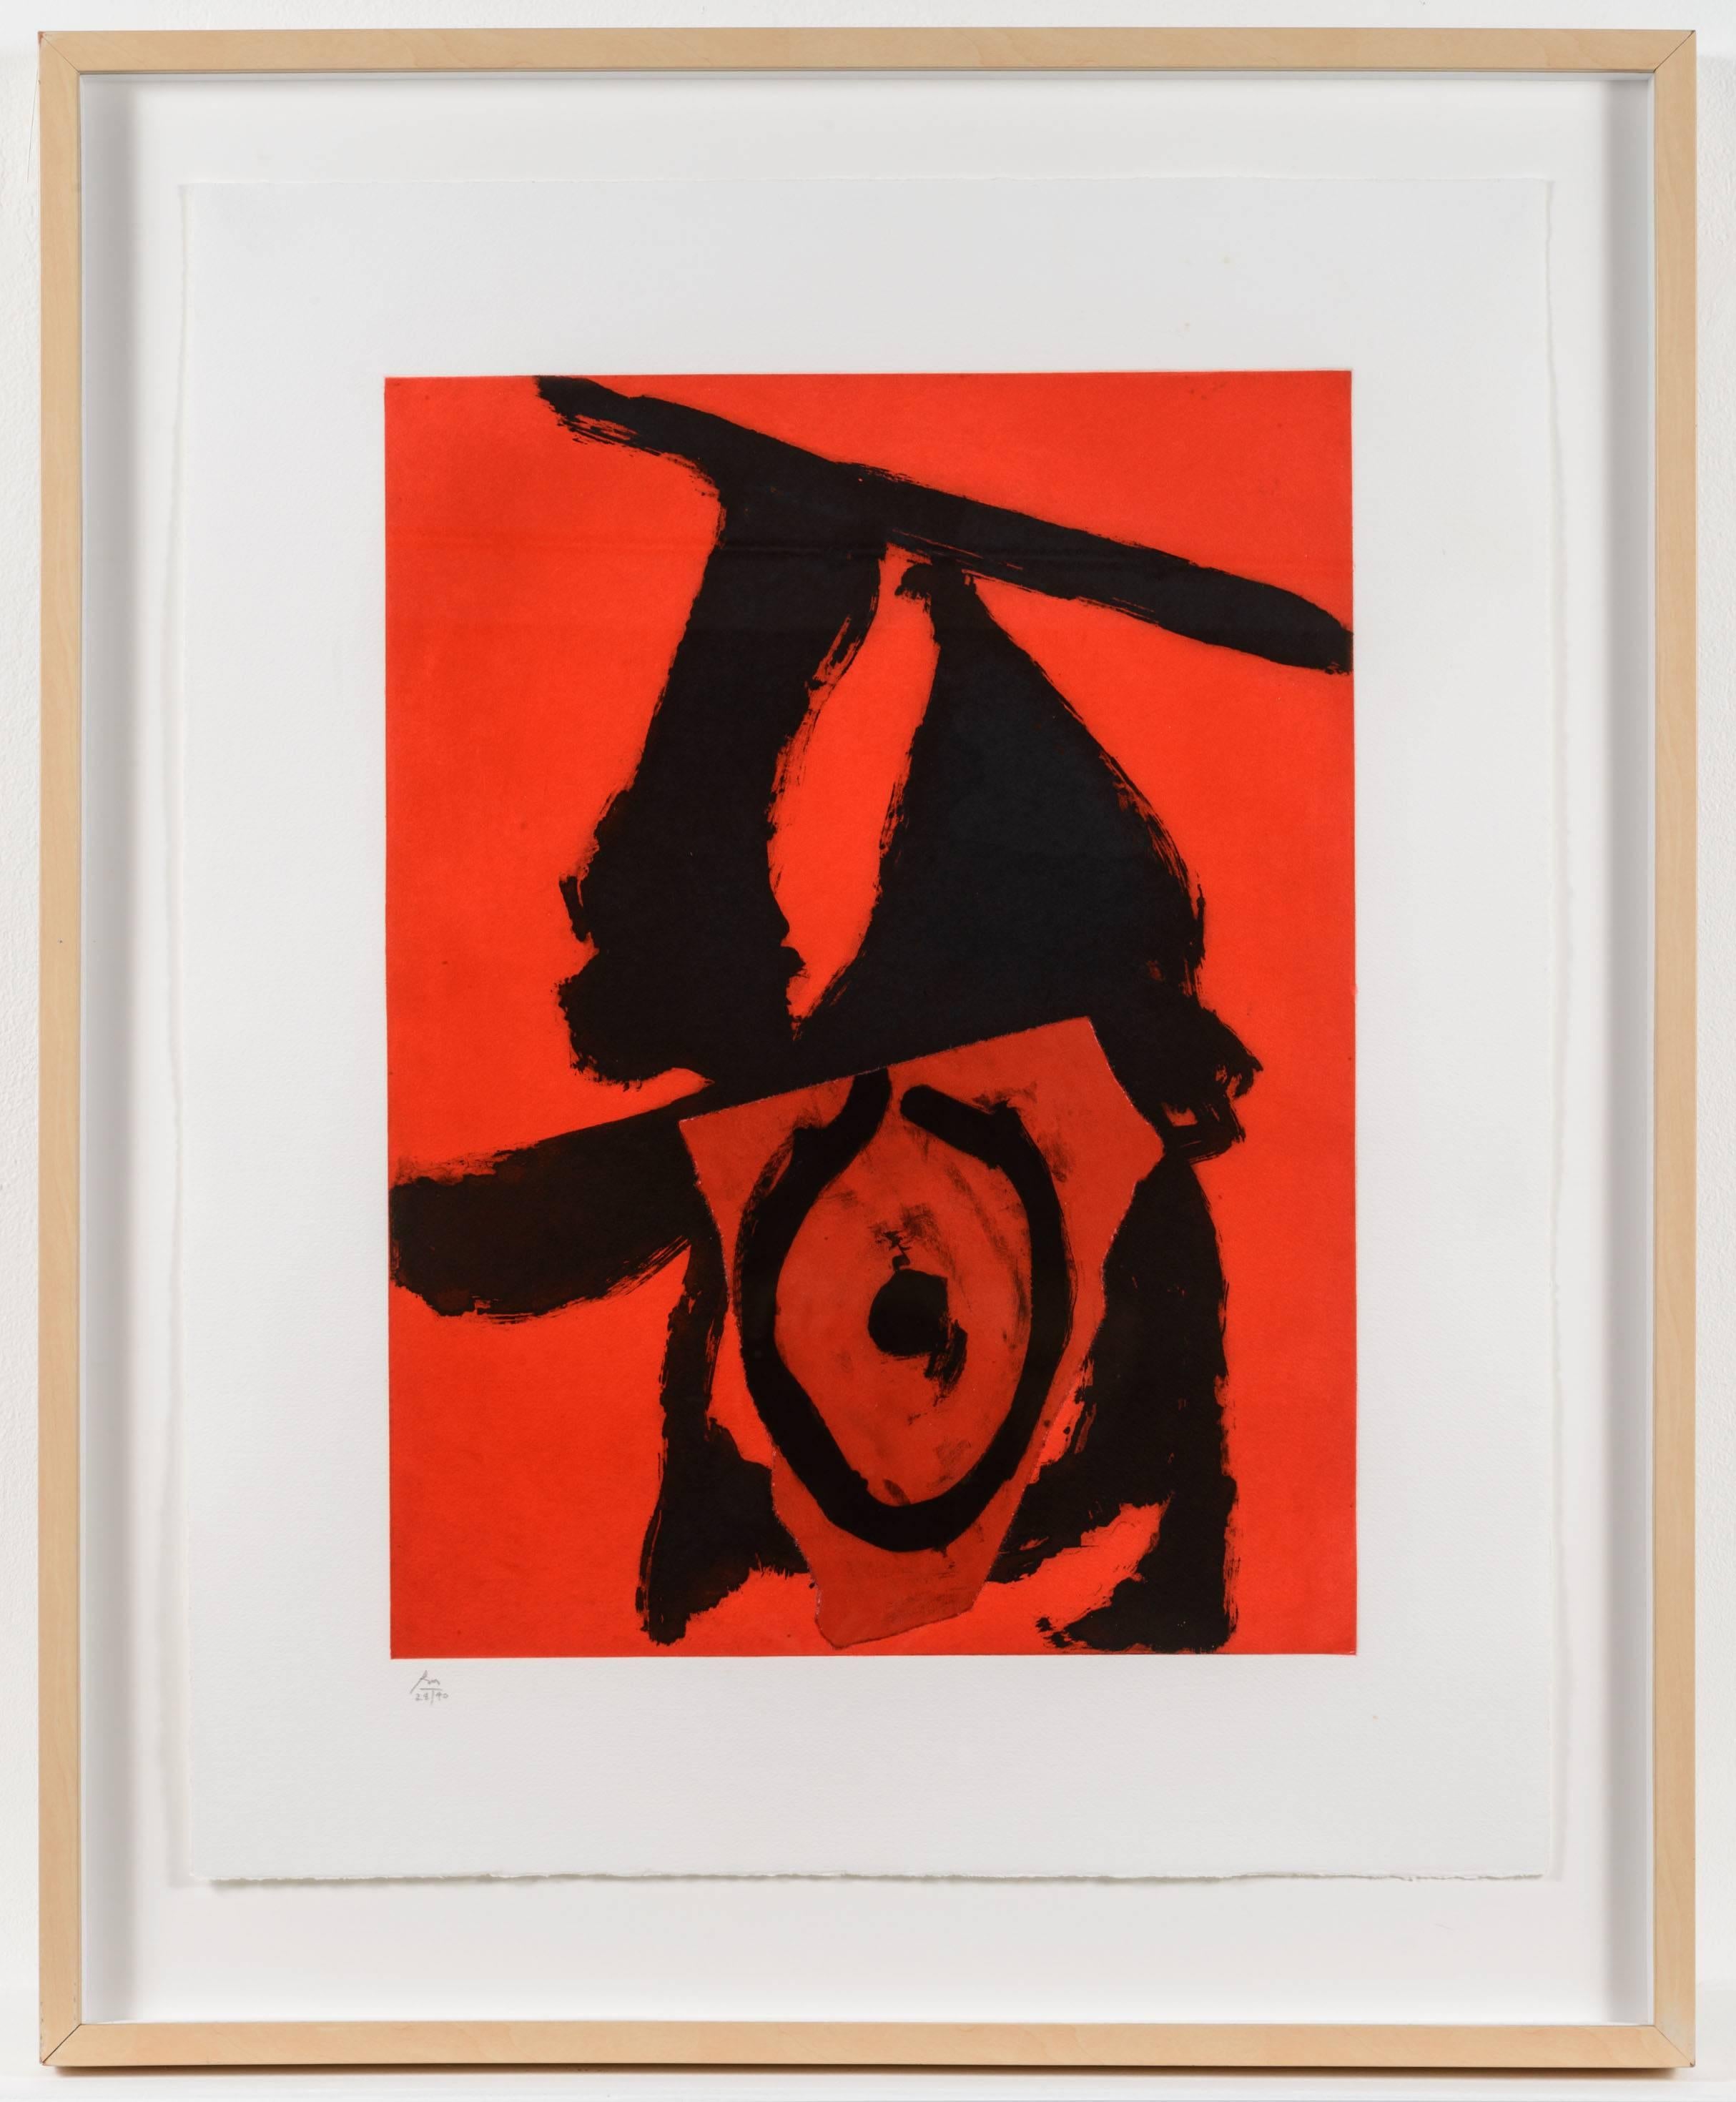 Red Queen - Contemporary Print by Robert Motherwell